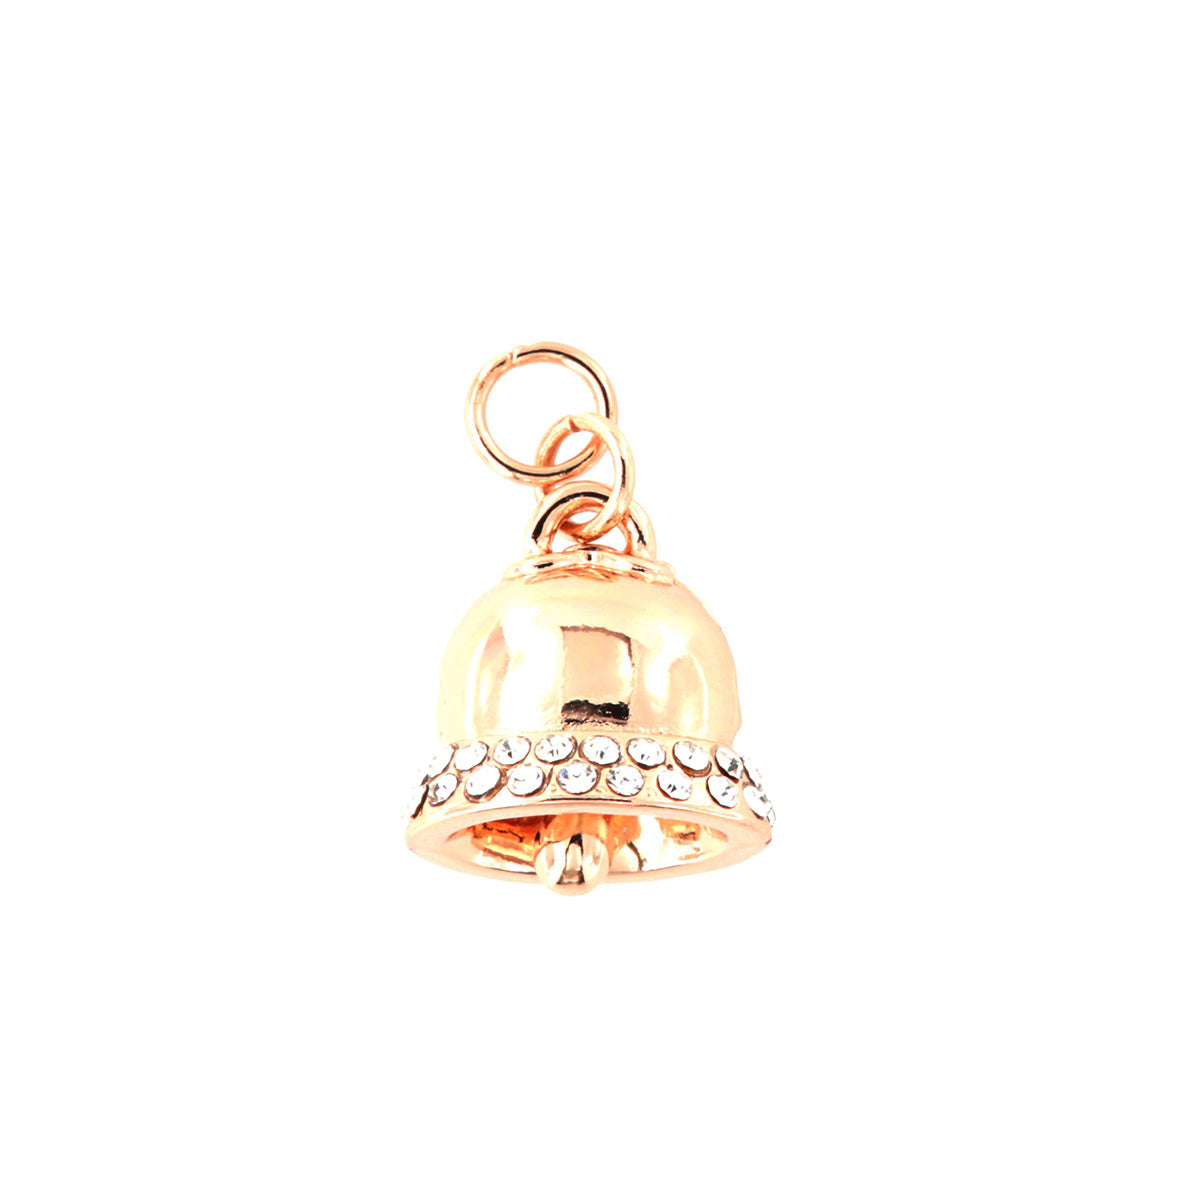 Metal pendant bell tacky bell embellished with white crystals